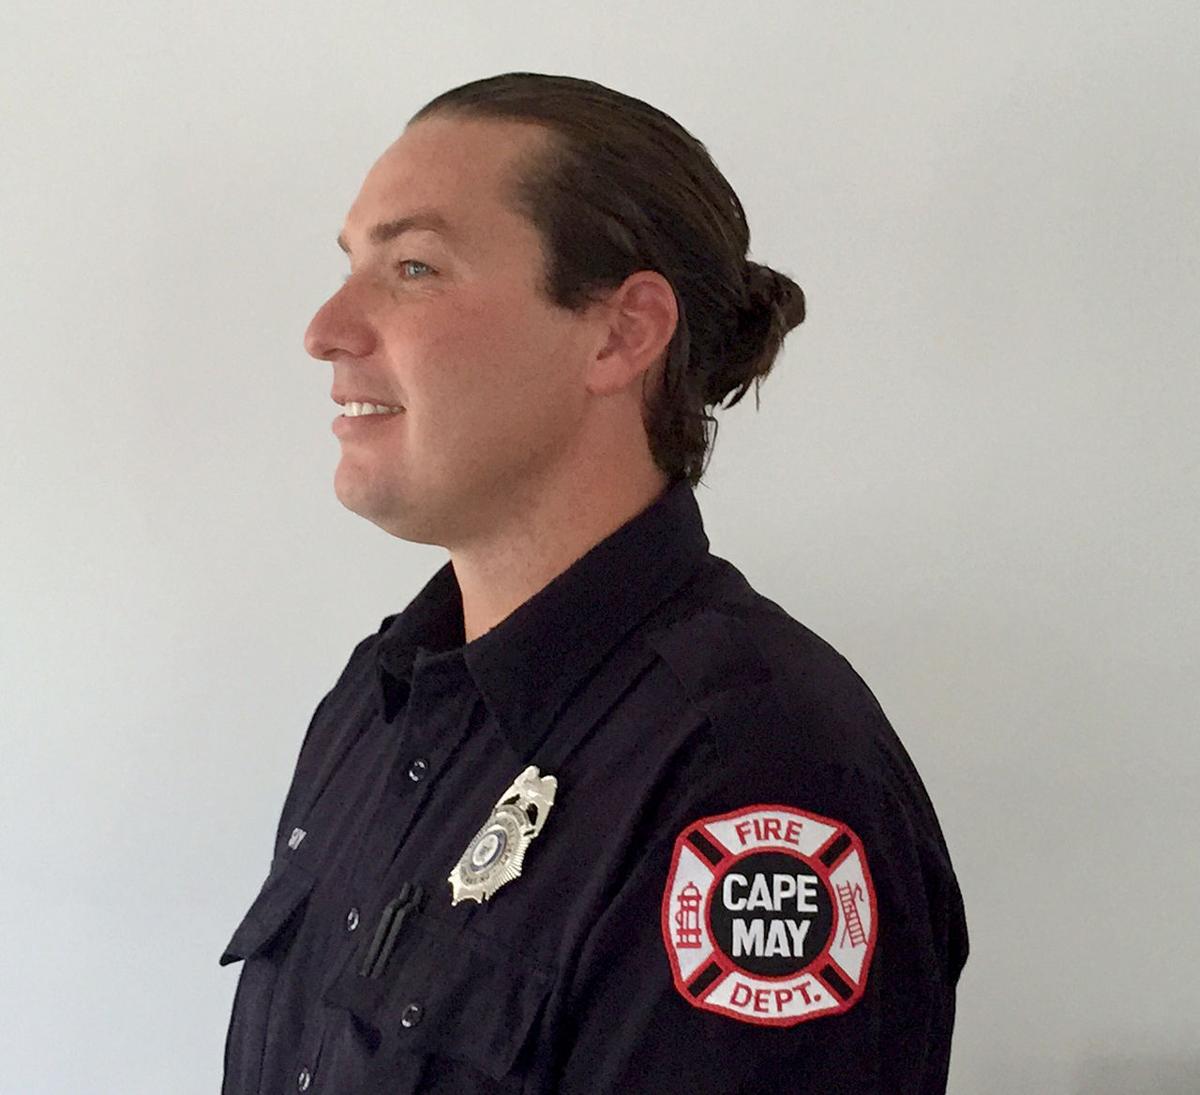 Cape May firefighter says hair regulations are gender discrimination